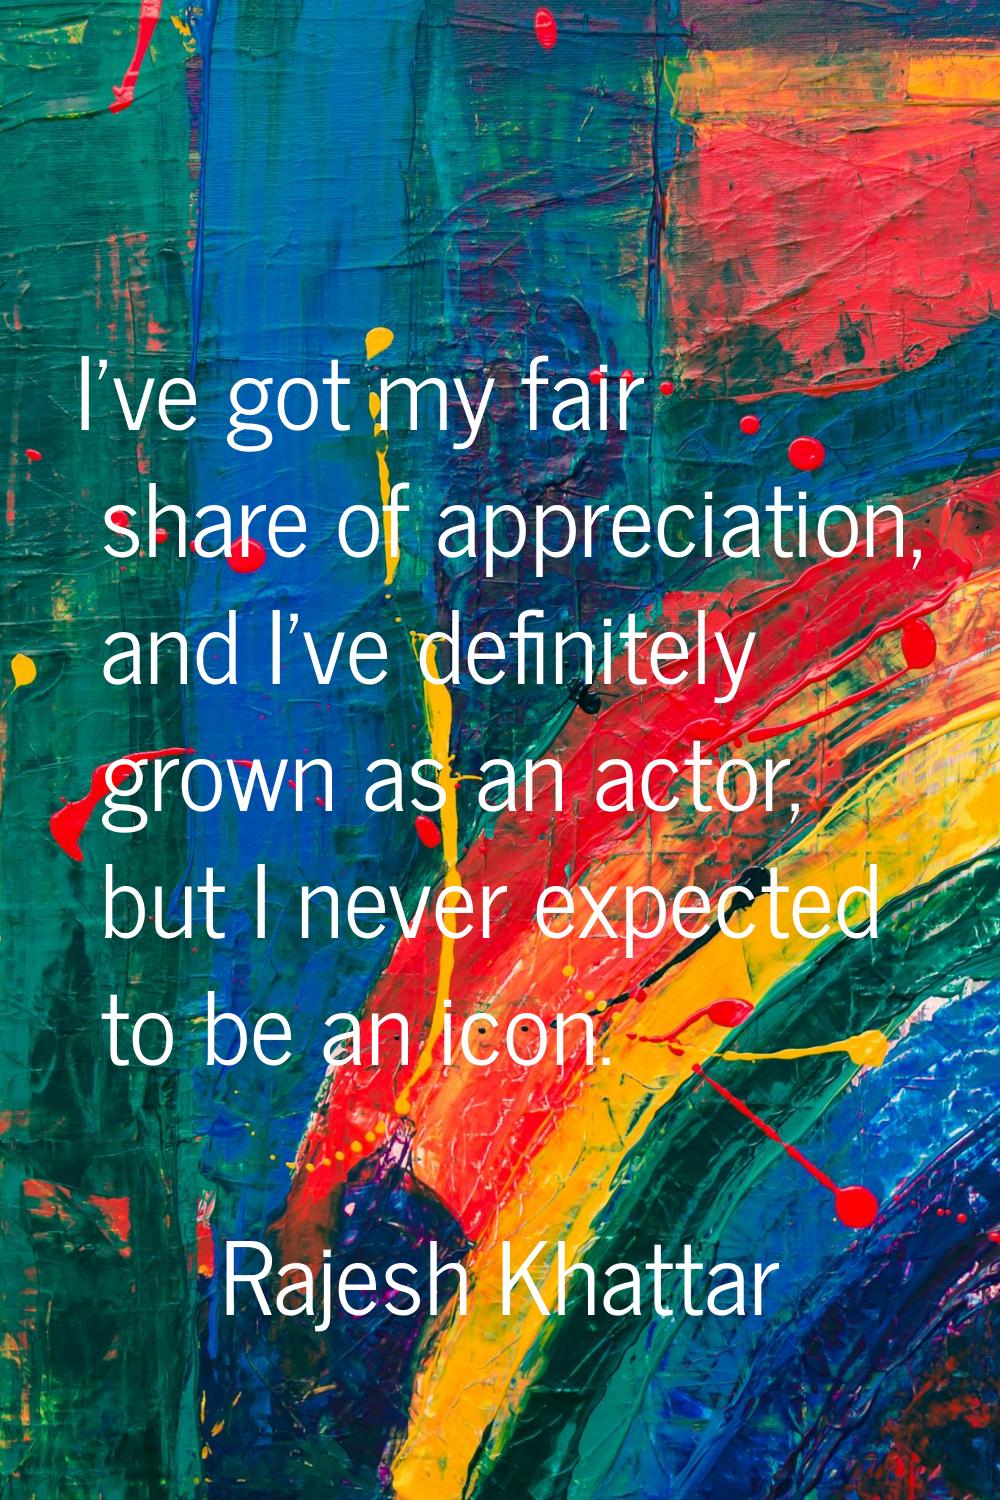 I've got my fair share of appreciation, and I've definitely grown as an actor, but I never expected